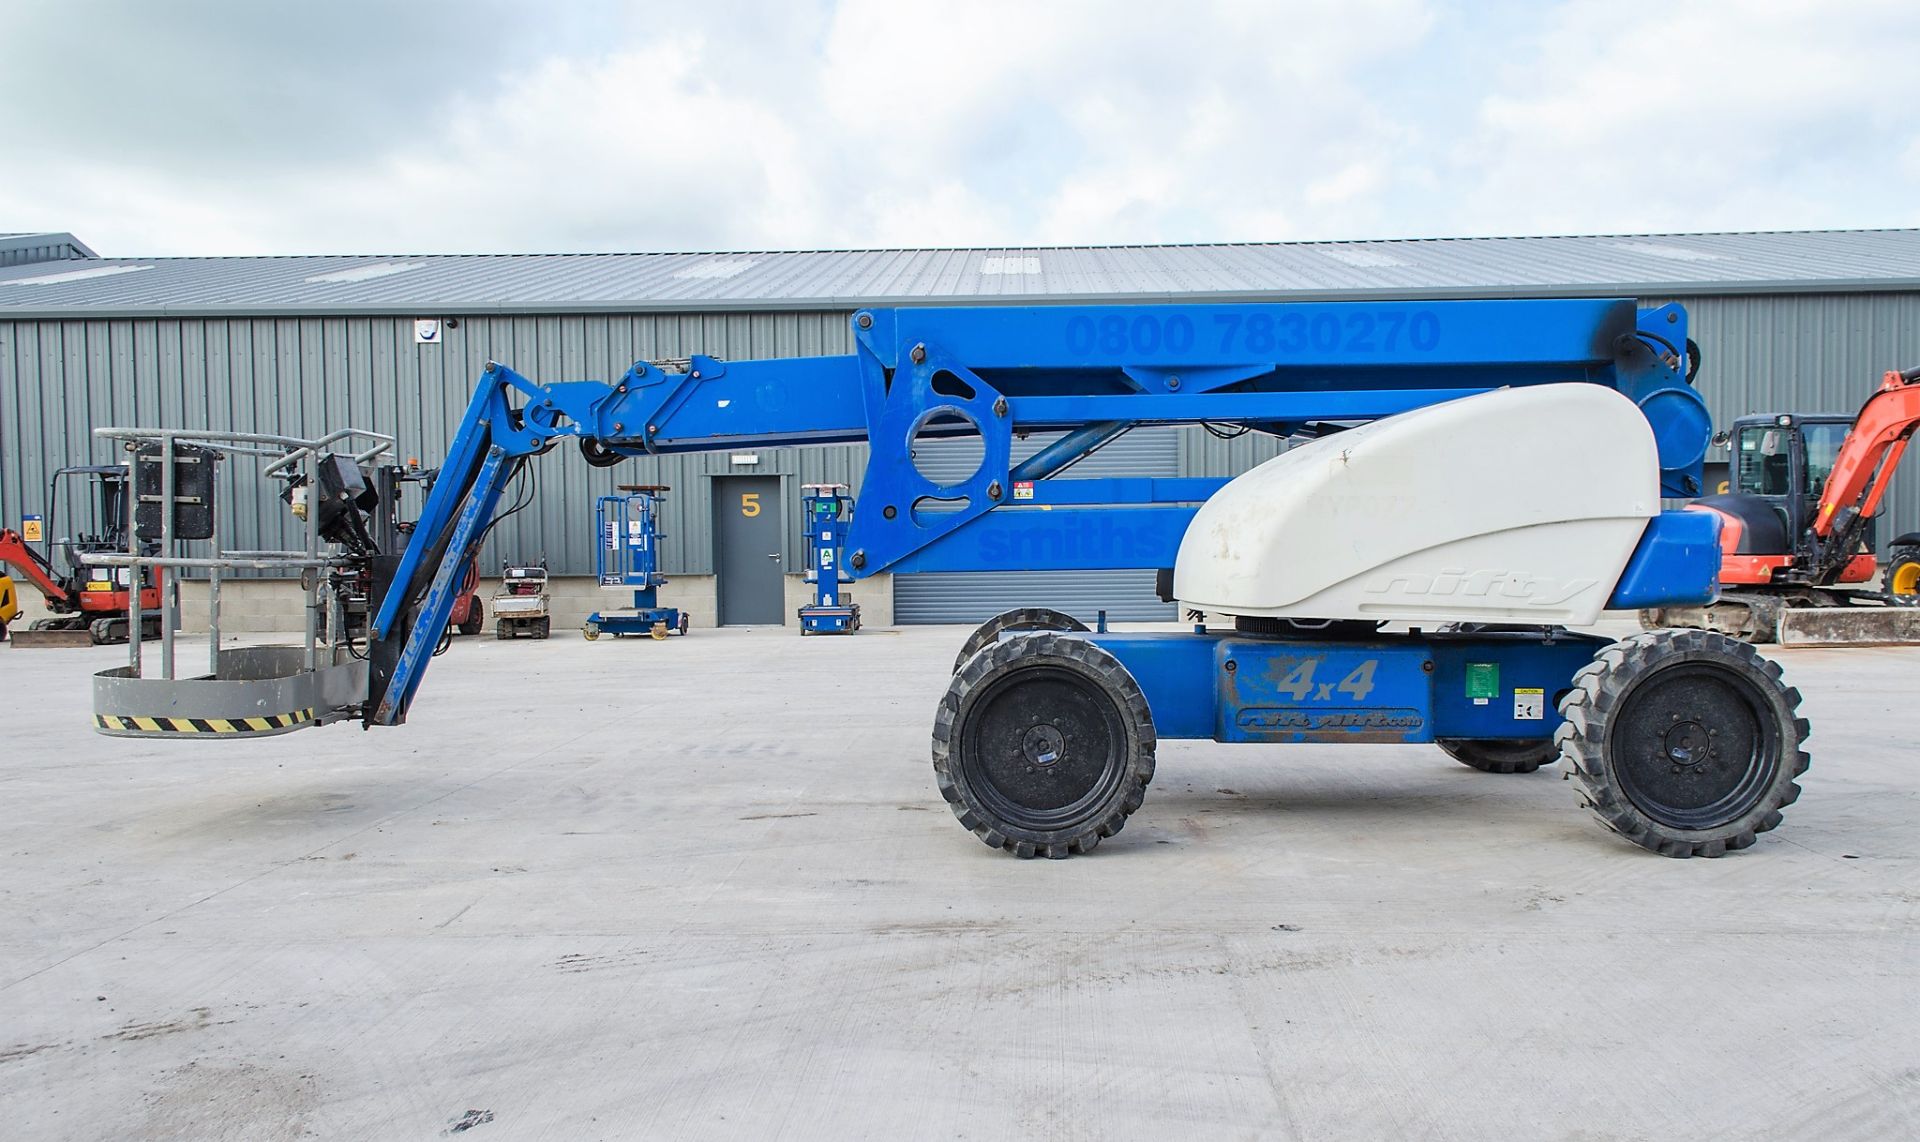 Nifty HR21D 4x4 diesel driven articulated boom access platform Year: 2007 S/N: 2116142 Recorded - Image 8 of 17